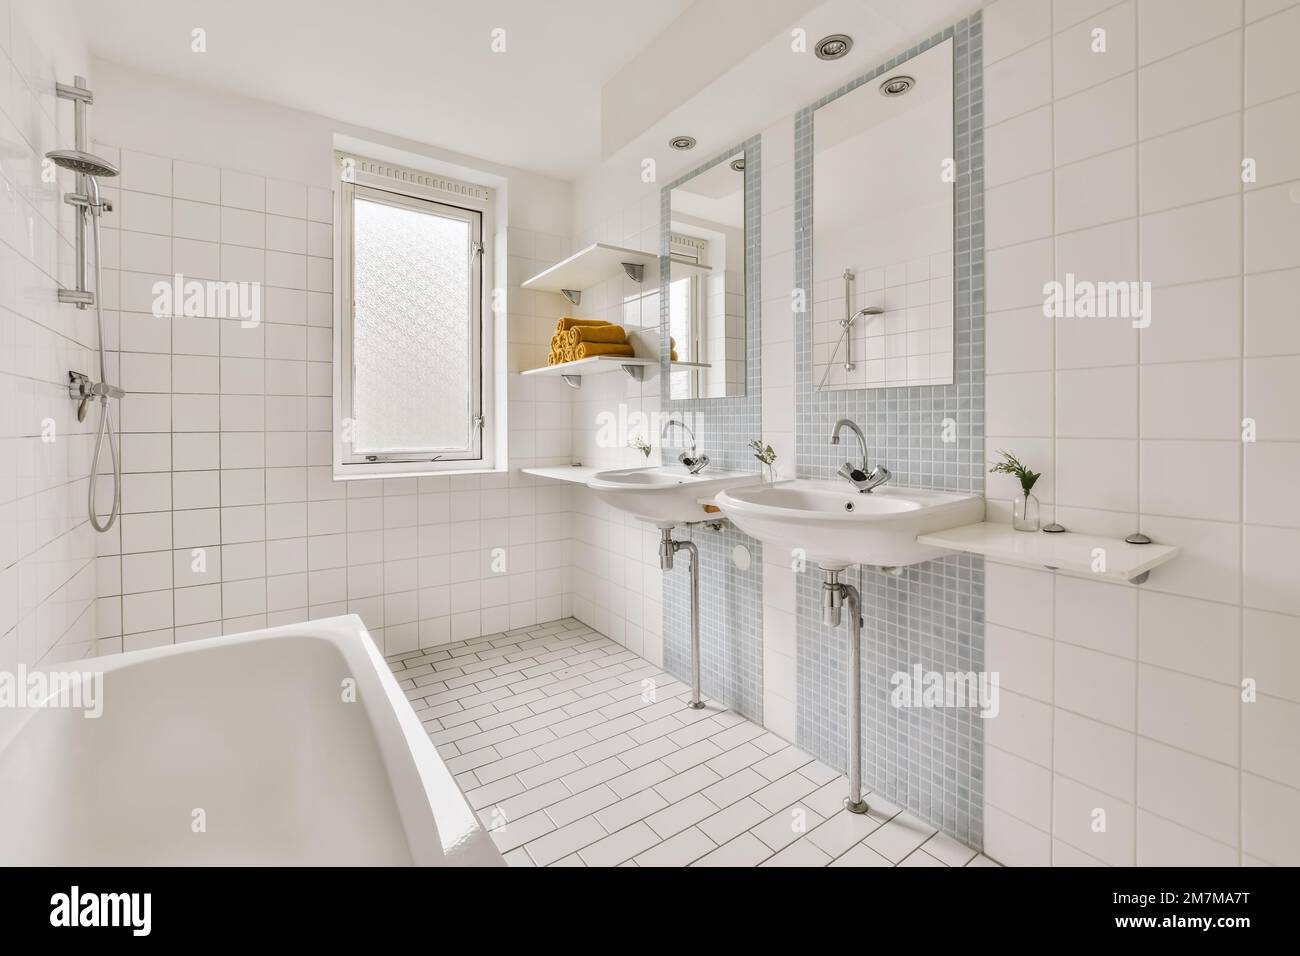 a bathroom with blue and white tiles on the walls, tub, sink and shower stall in front of the mirror Stock Photo